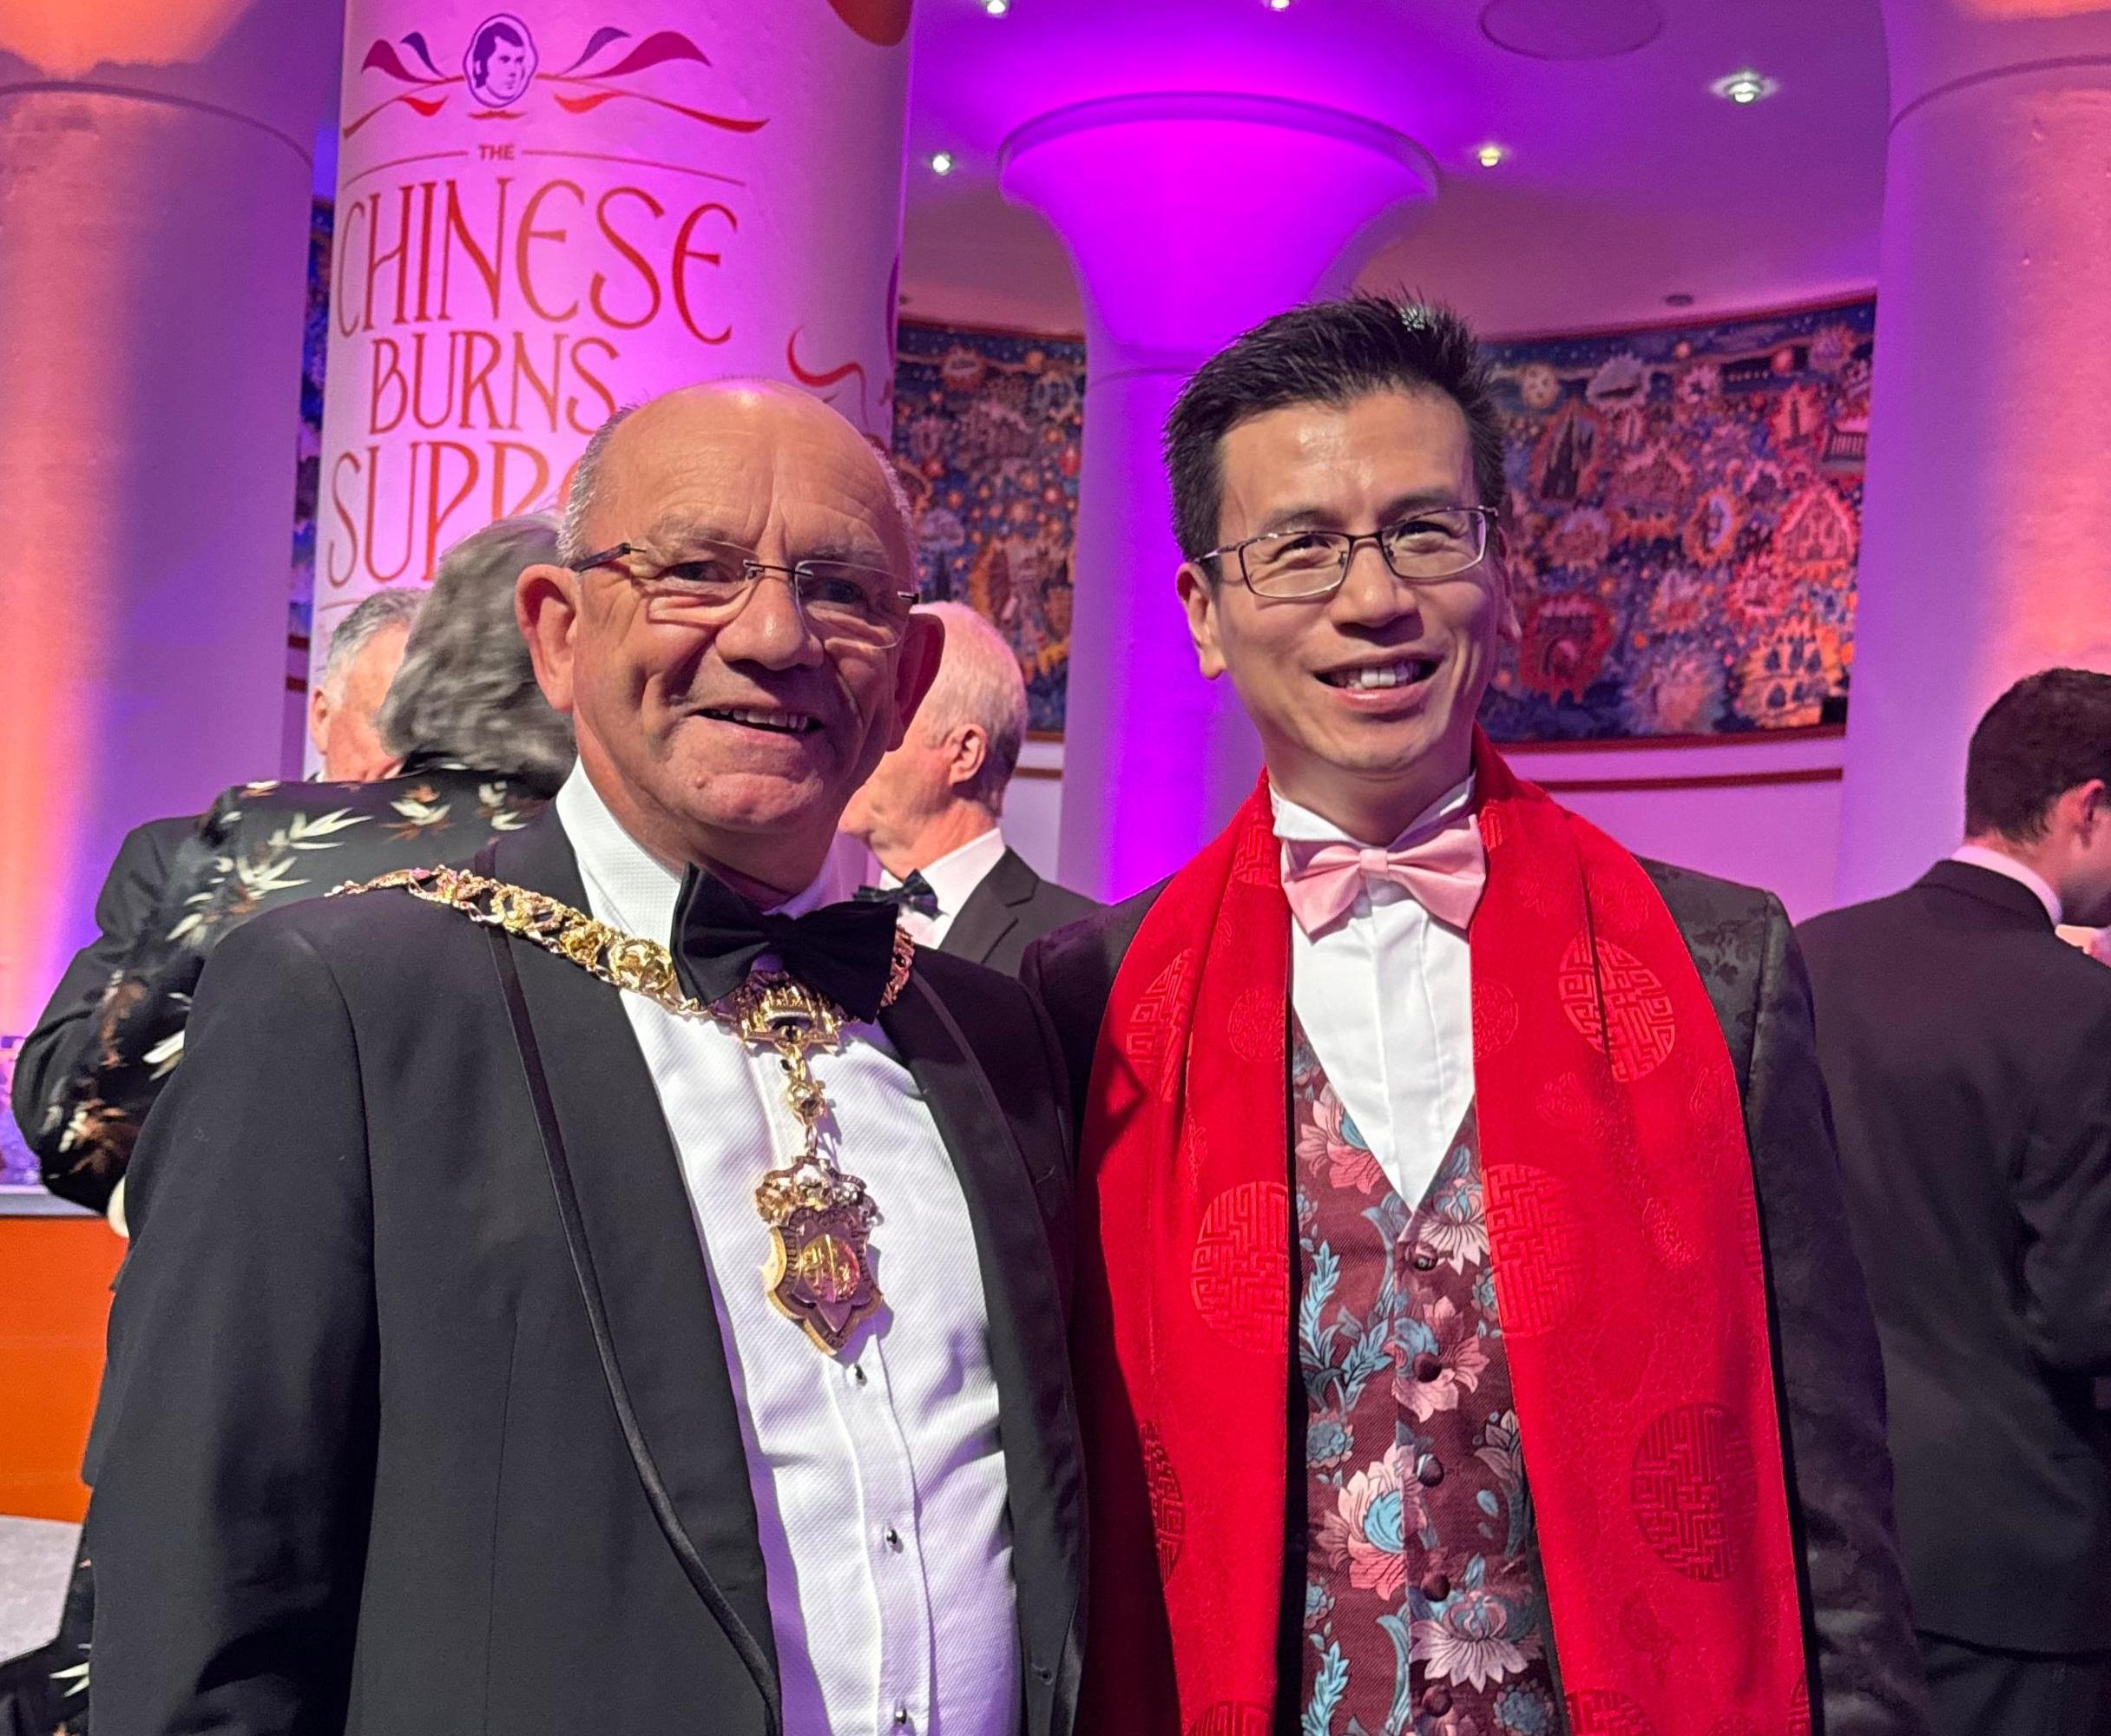 The Hong Kong Economic and Trade Office, London (London ETO) hosted the "Toast to the Dragon" reception in Edinburgh, the United Kingdom, on February 8 (London time). Photo shows (left) the Lord Provost of Edinburgh, Mr Robert Aldridge and the Director-General of the London ETO, Mr Gilford Law (right).